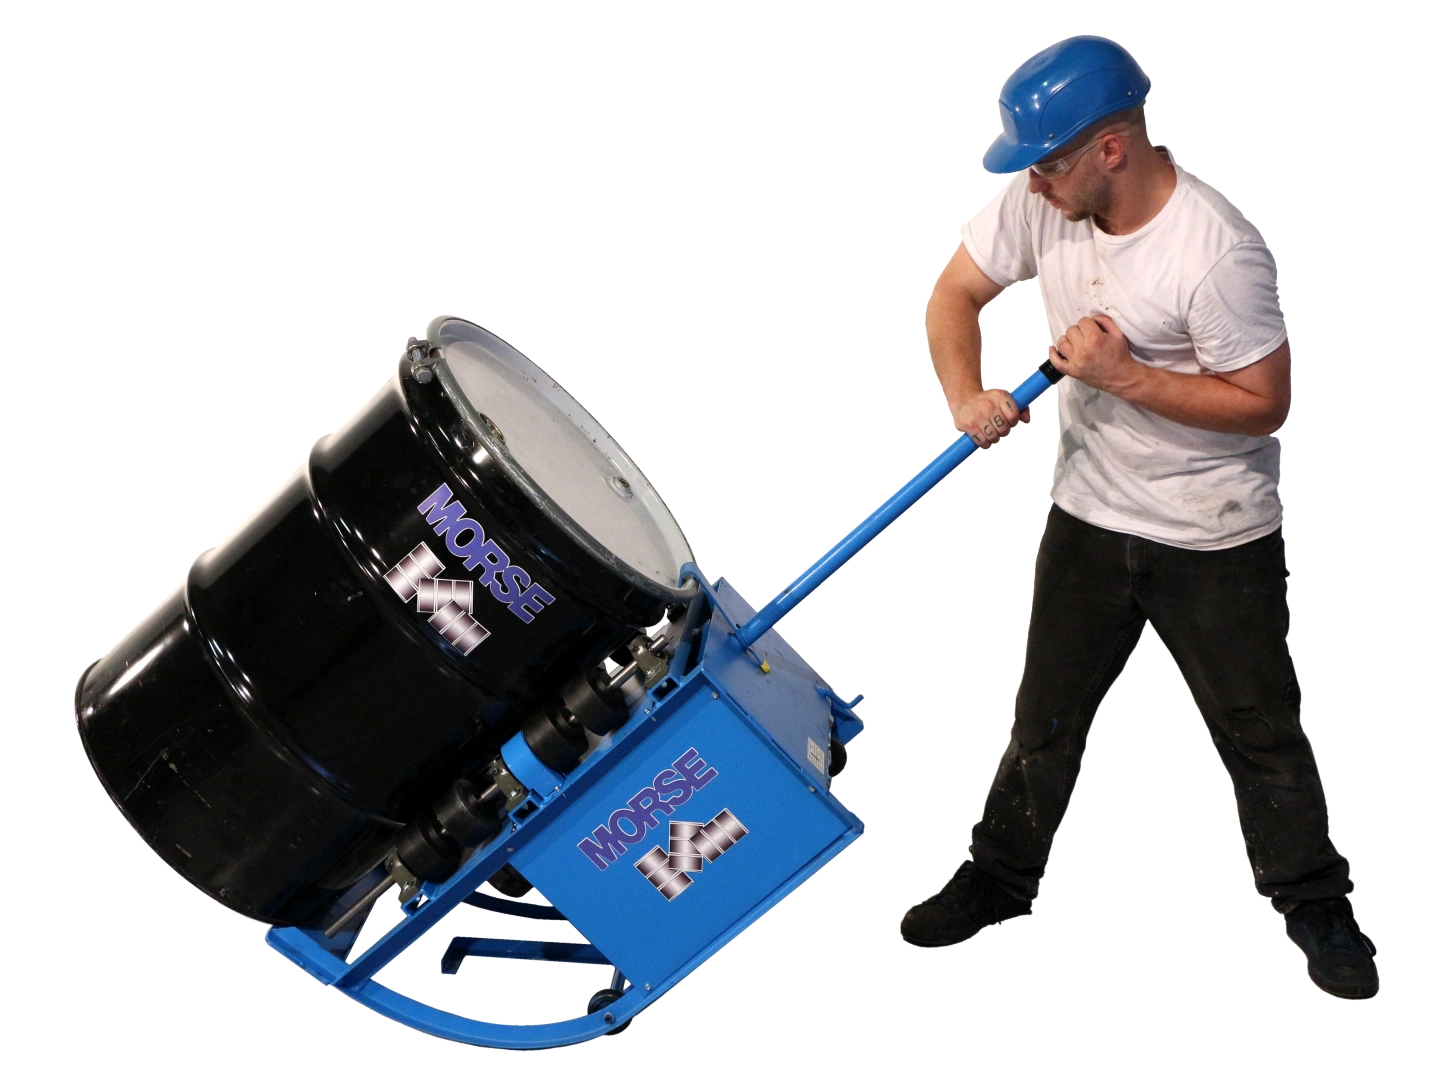 Image of 201 Series Portable Drum Roller